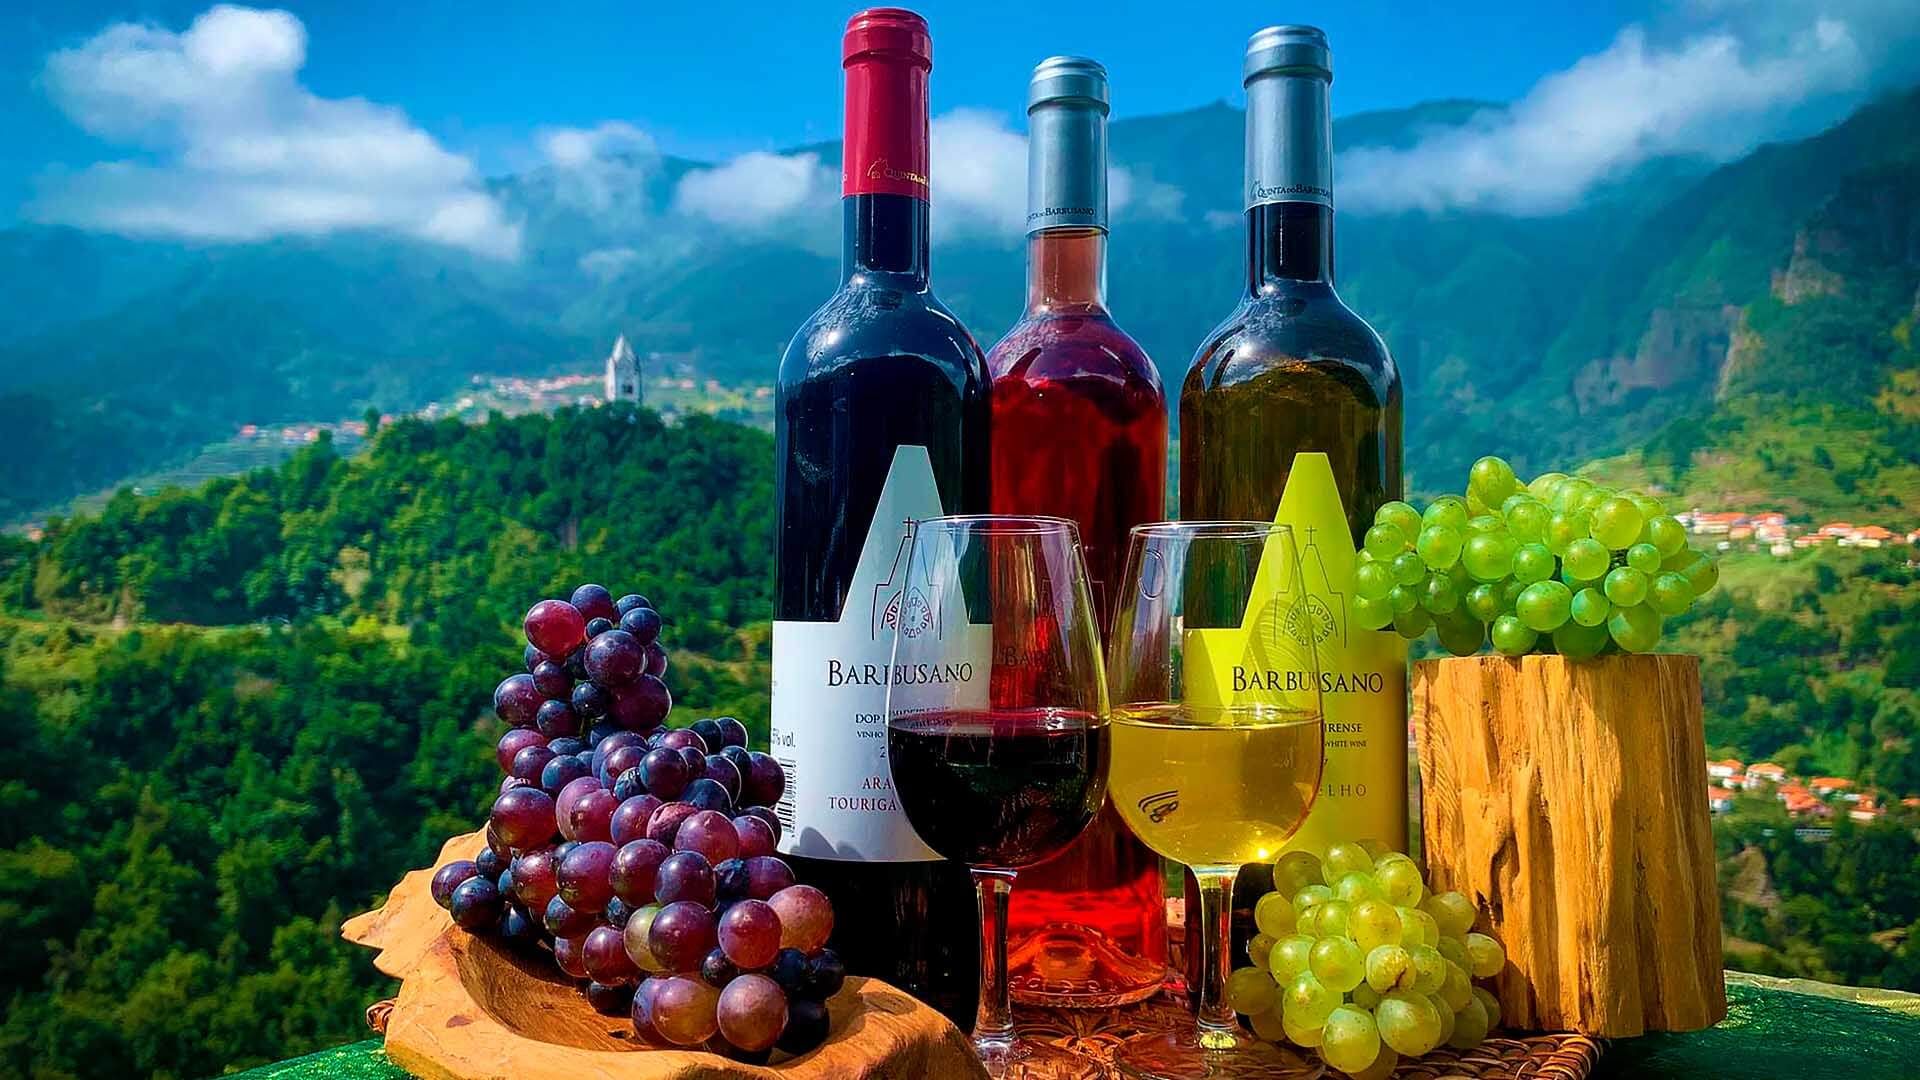 PRIVATE SKYWALK & PROFESSIONAL WINE EXPERIENCE